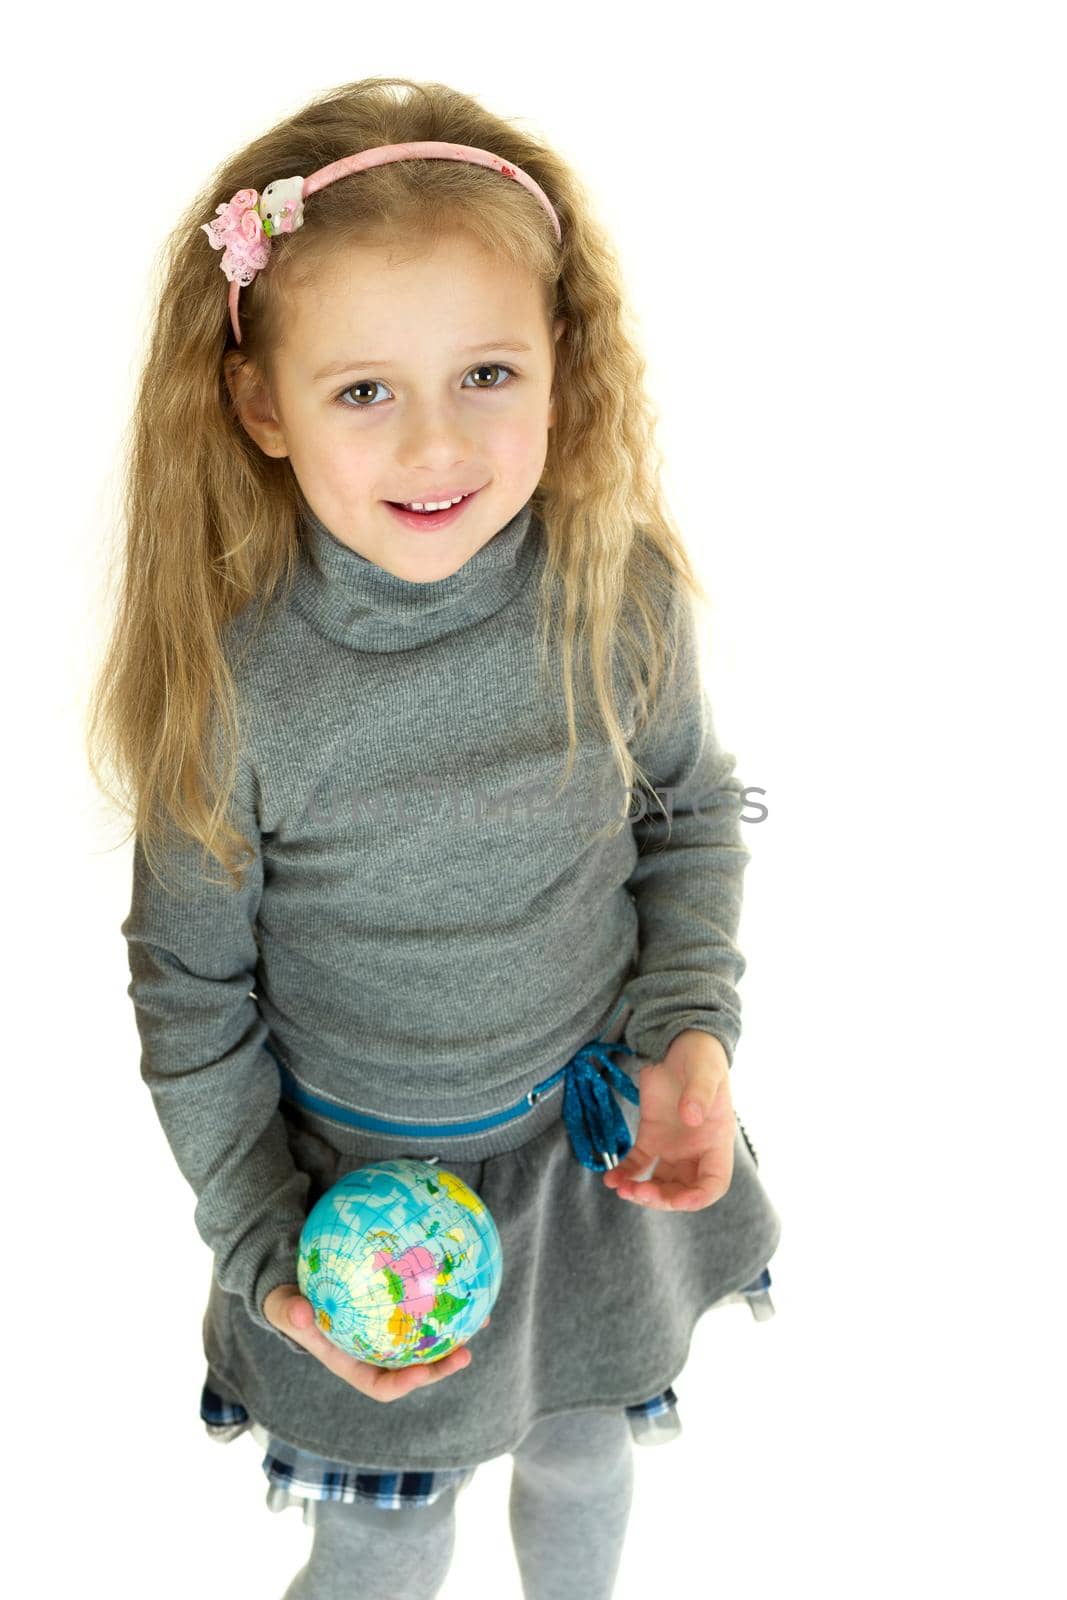 Cute girl holding small globe in her hands. Lovely girl elementary school student studying geography with globe. Cute kid wearing casual clothes posing against white background